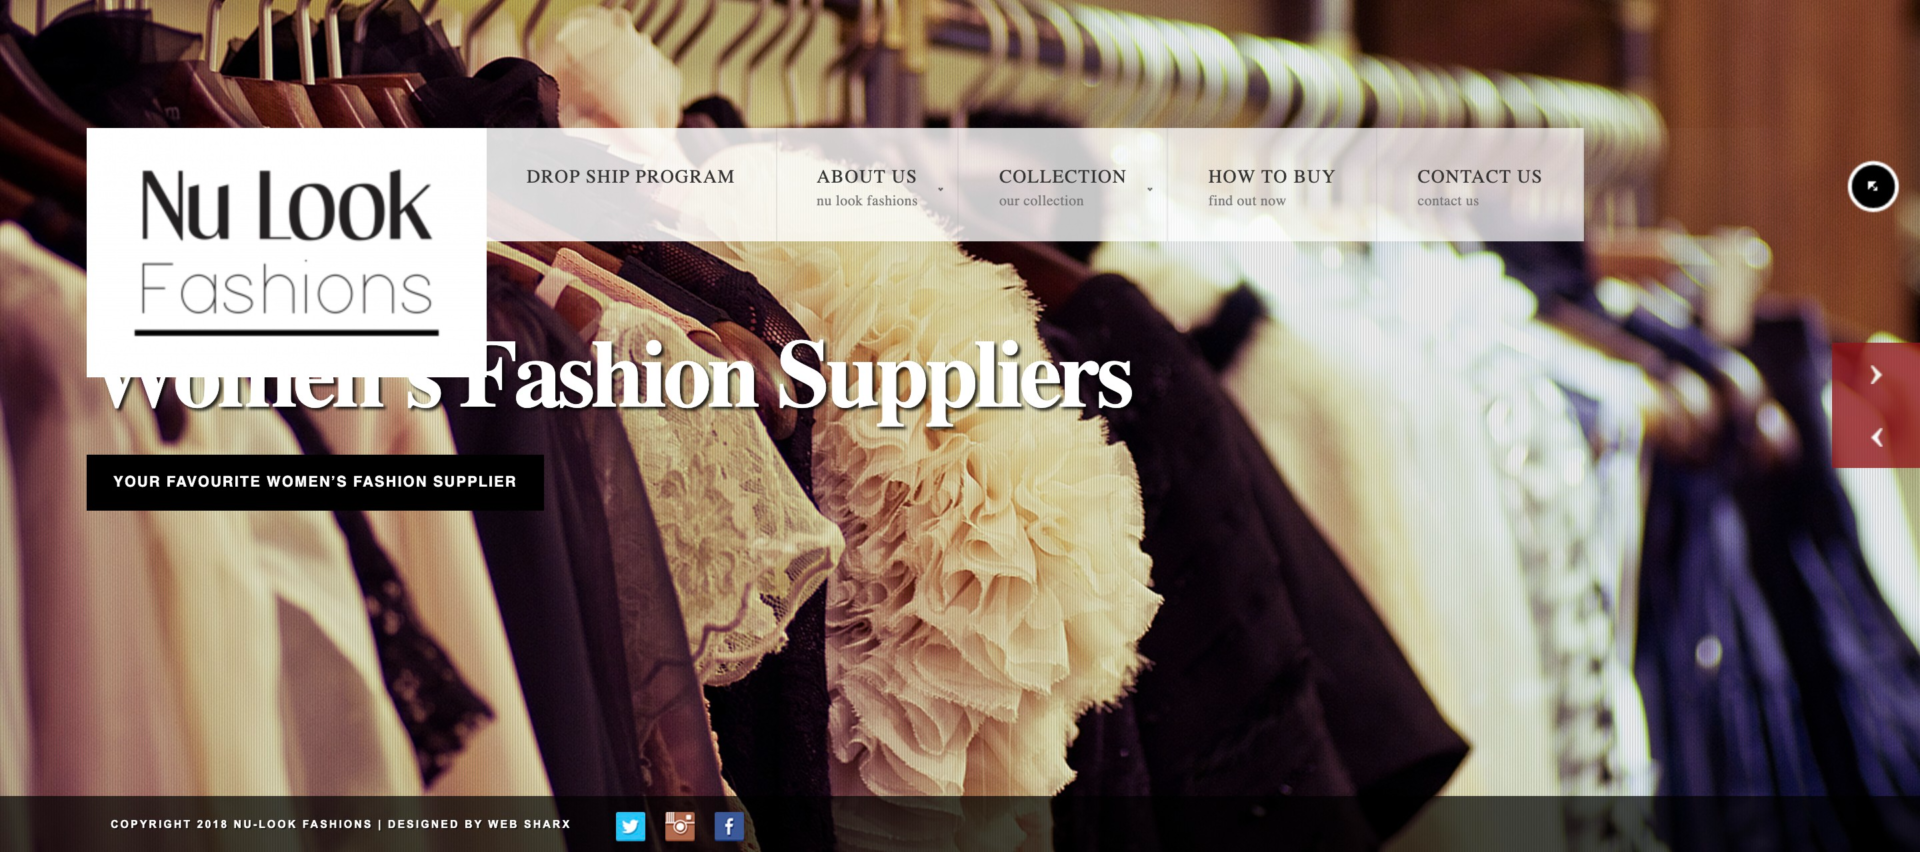 Canada's 12 Best Dropshipping Suppliers: Nu Look Fashions (Clothing)  